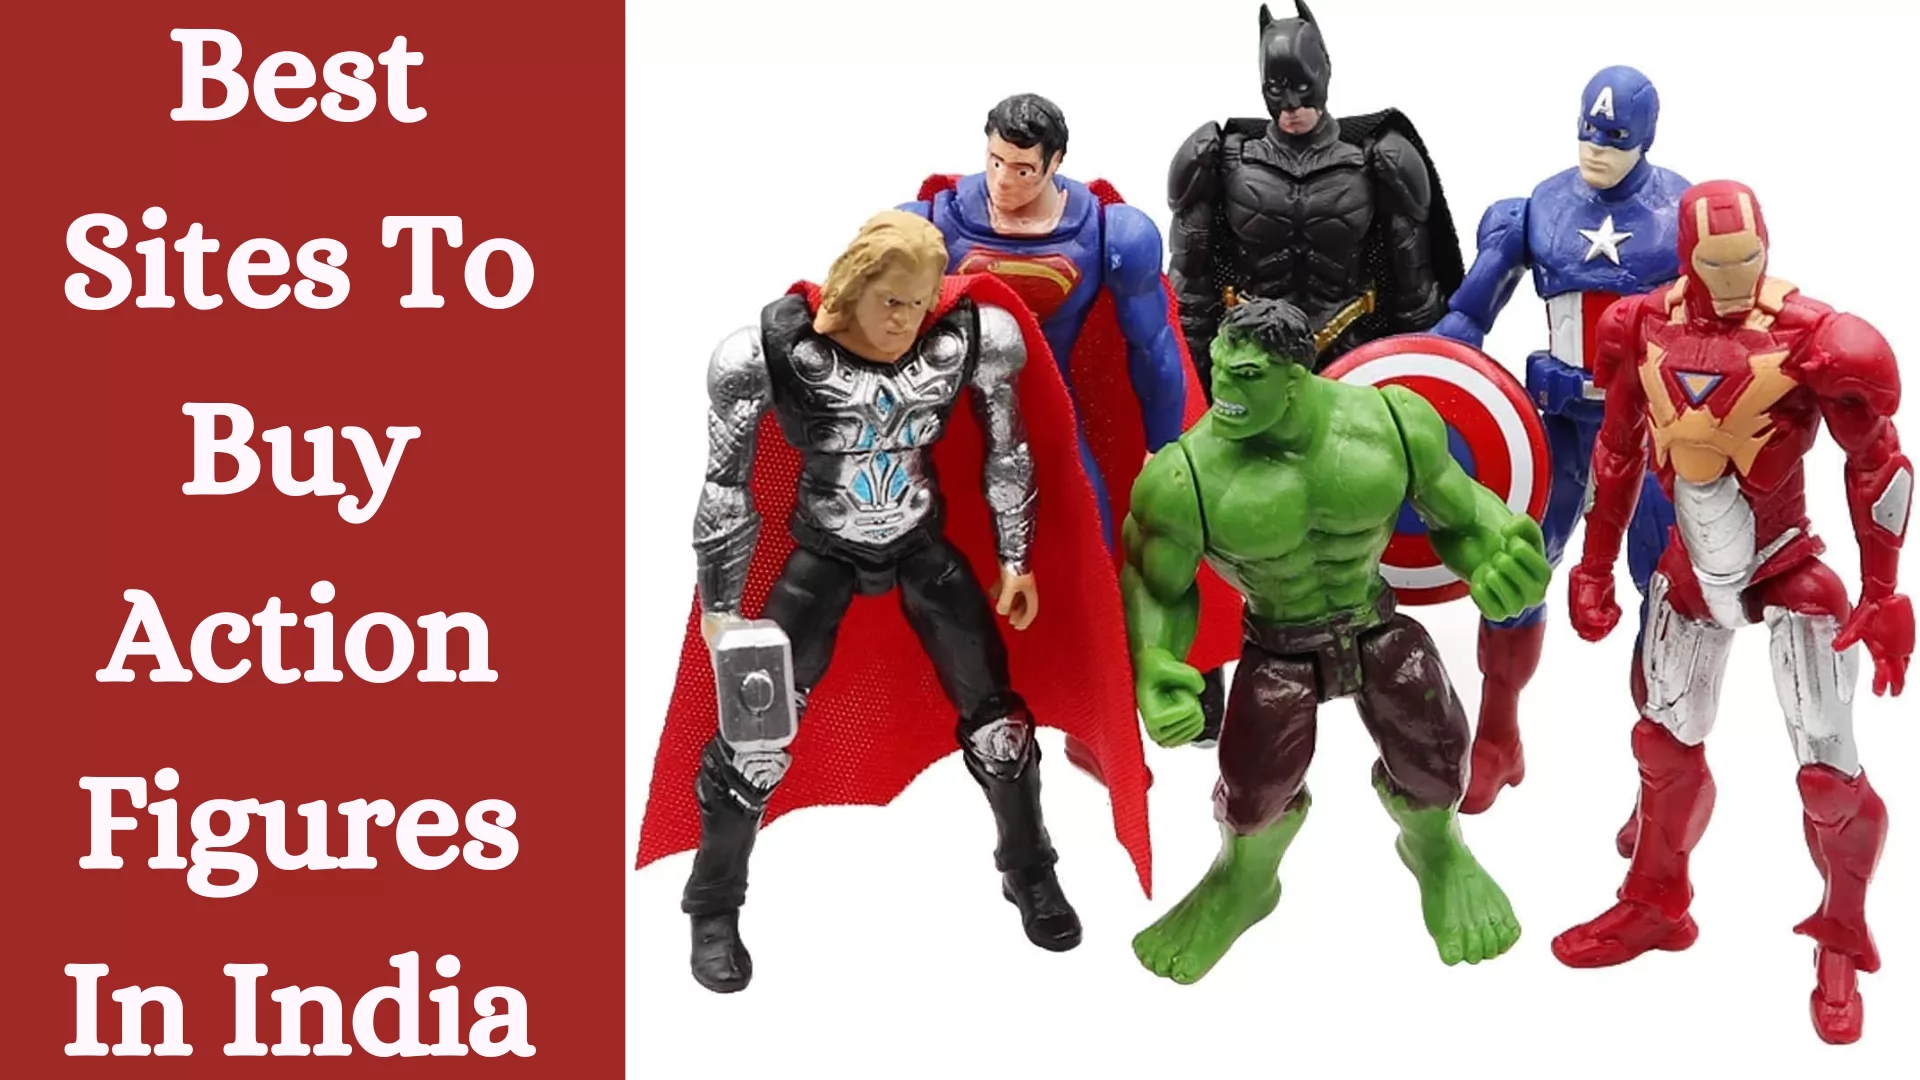 Best Sites To Buy Action Figures In India